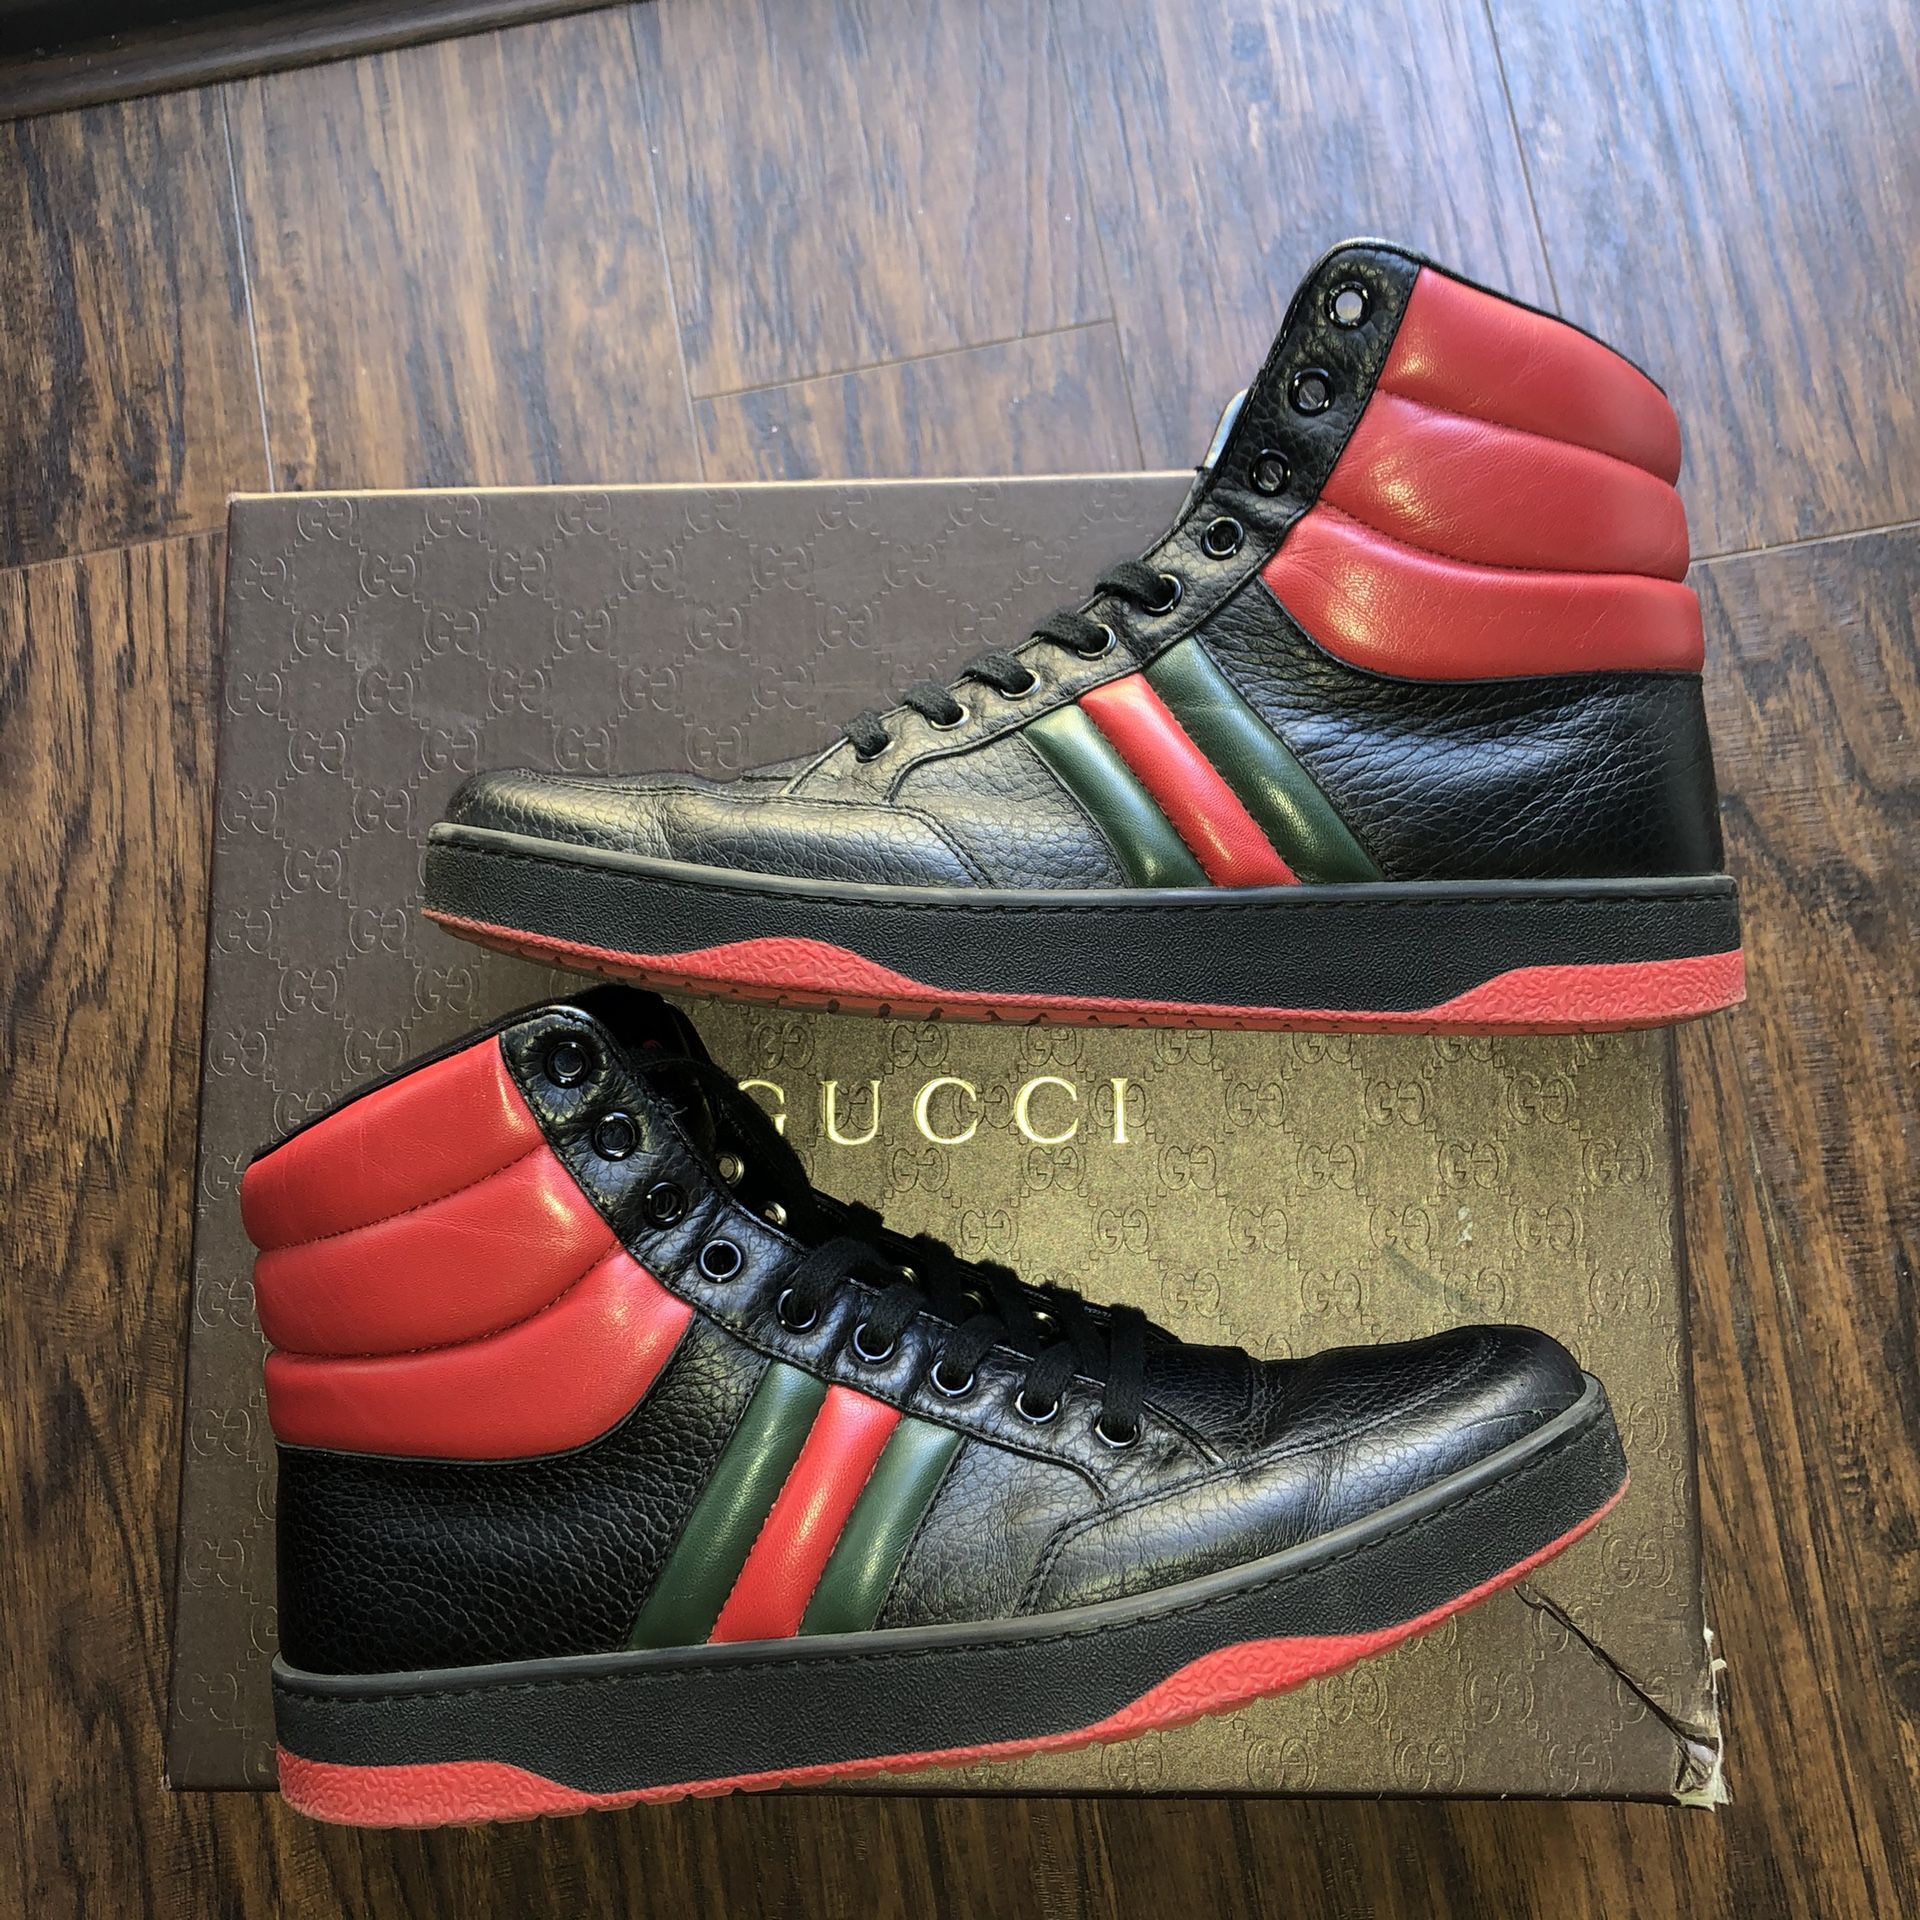 Gucci black & red leather “Ronnie” high top sneaker